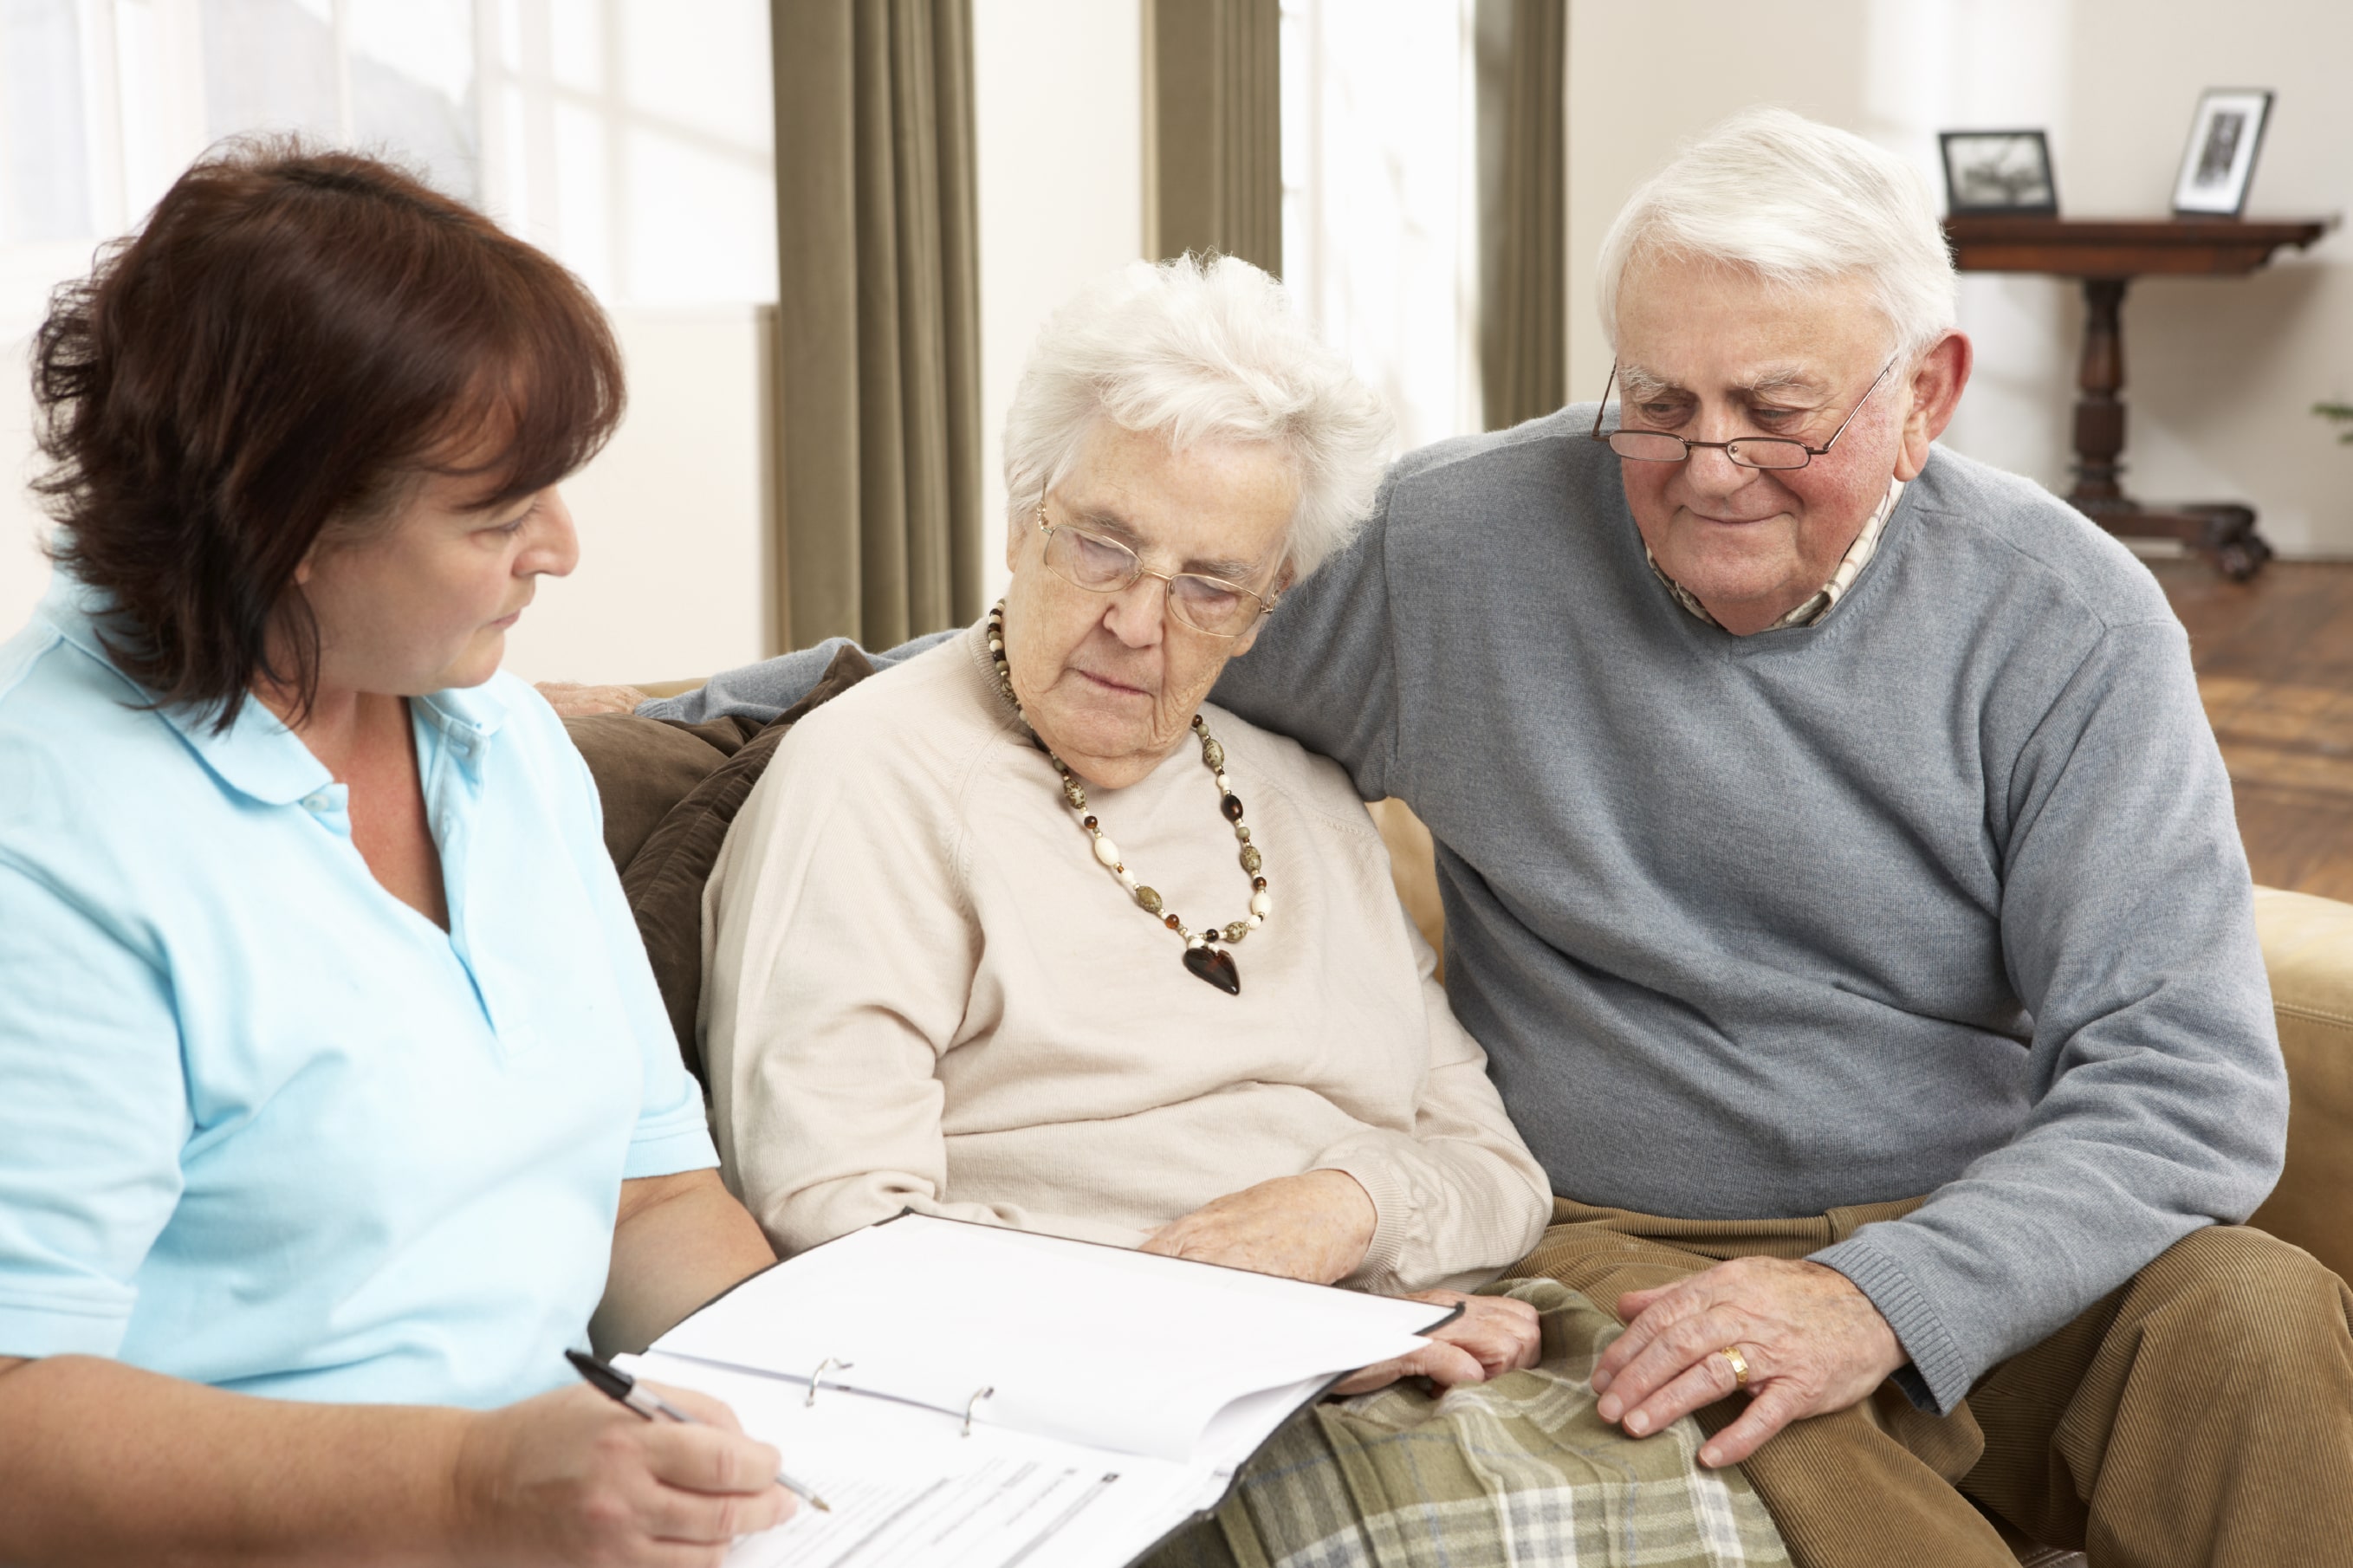 An older couple meeting with a health care professional